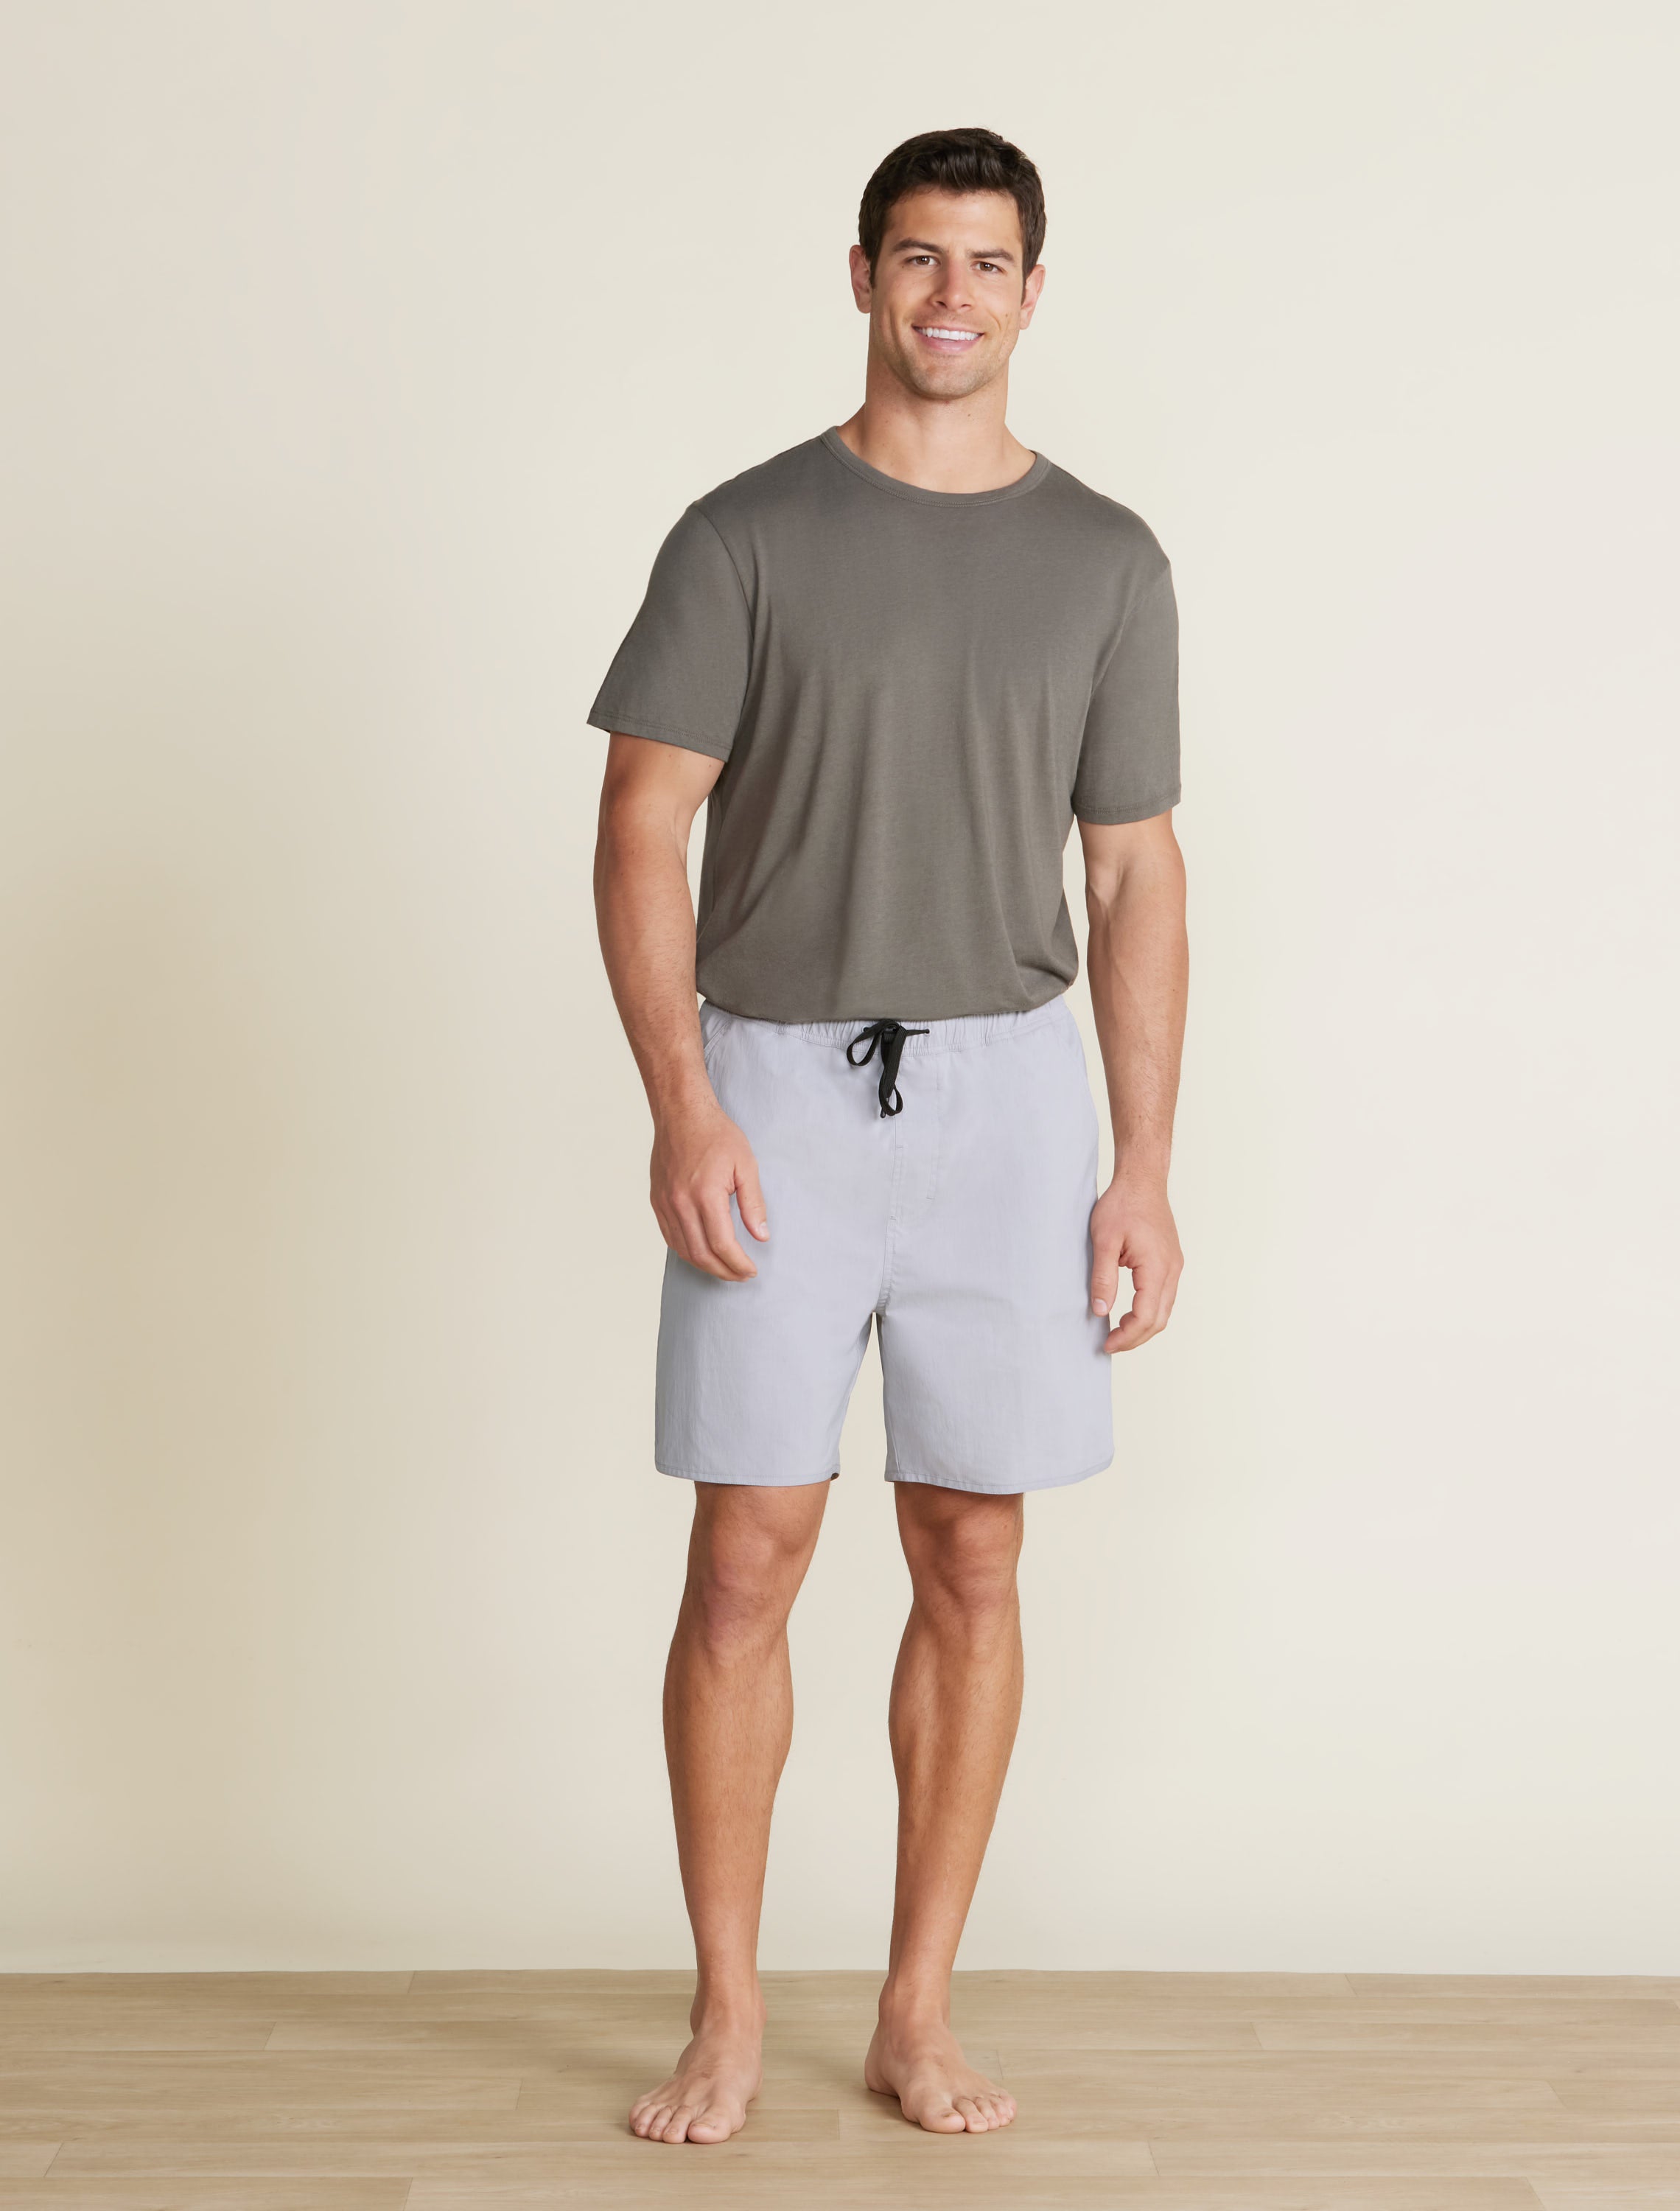 Casual, Comfortable Lounge Shorts for Men